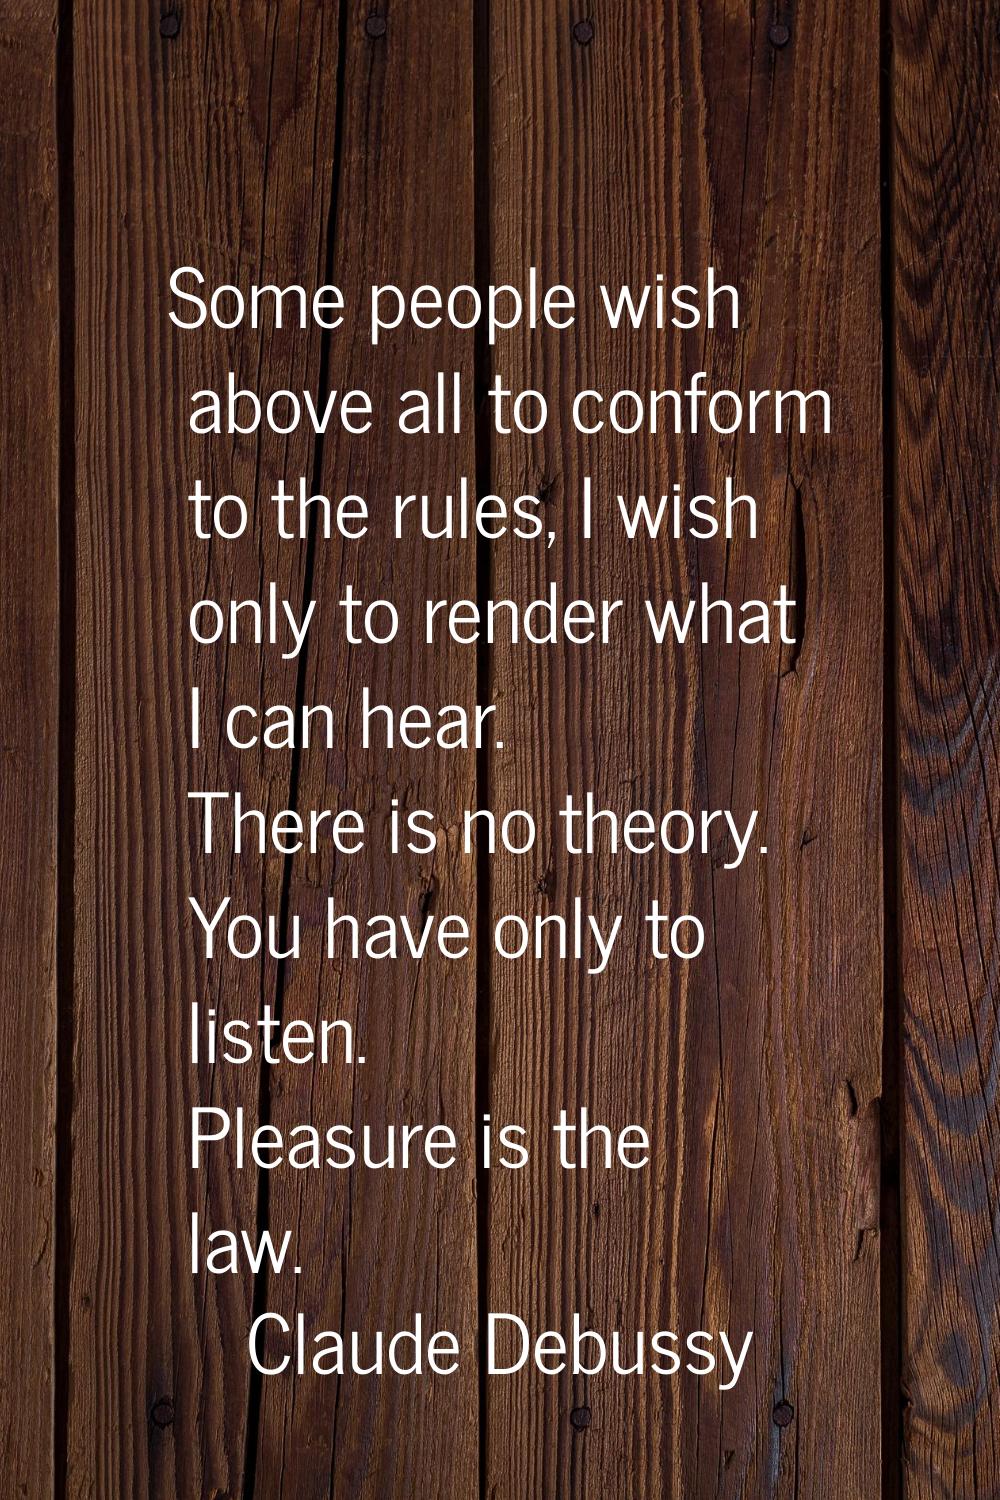 Some people wish above all to conform to the rules, I wish only to render what I can hear. There is